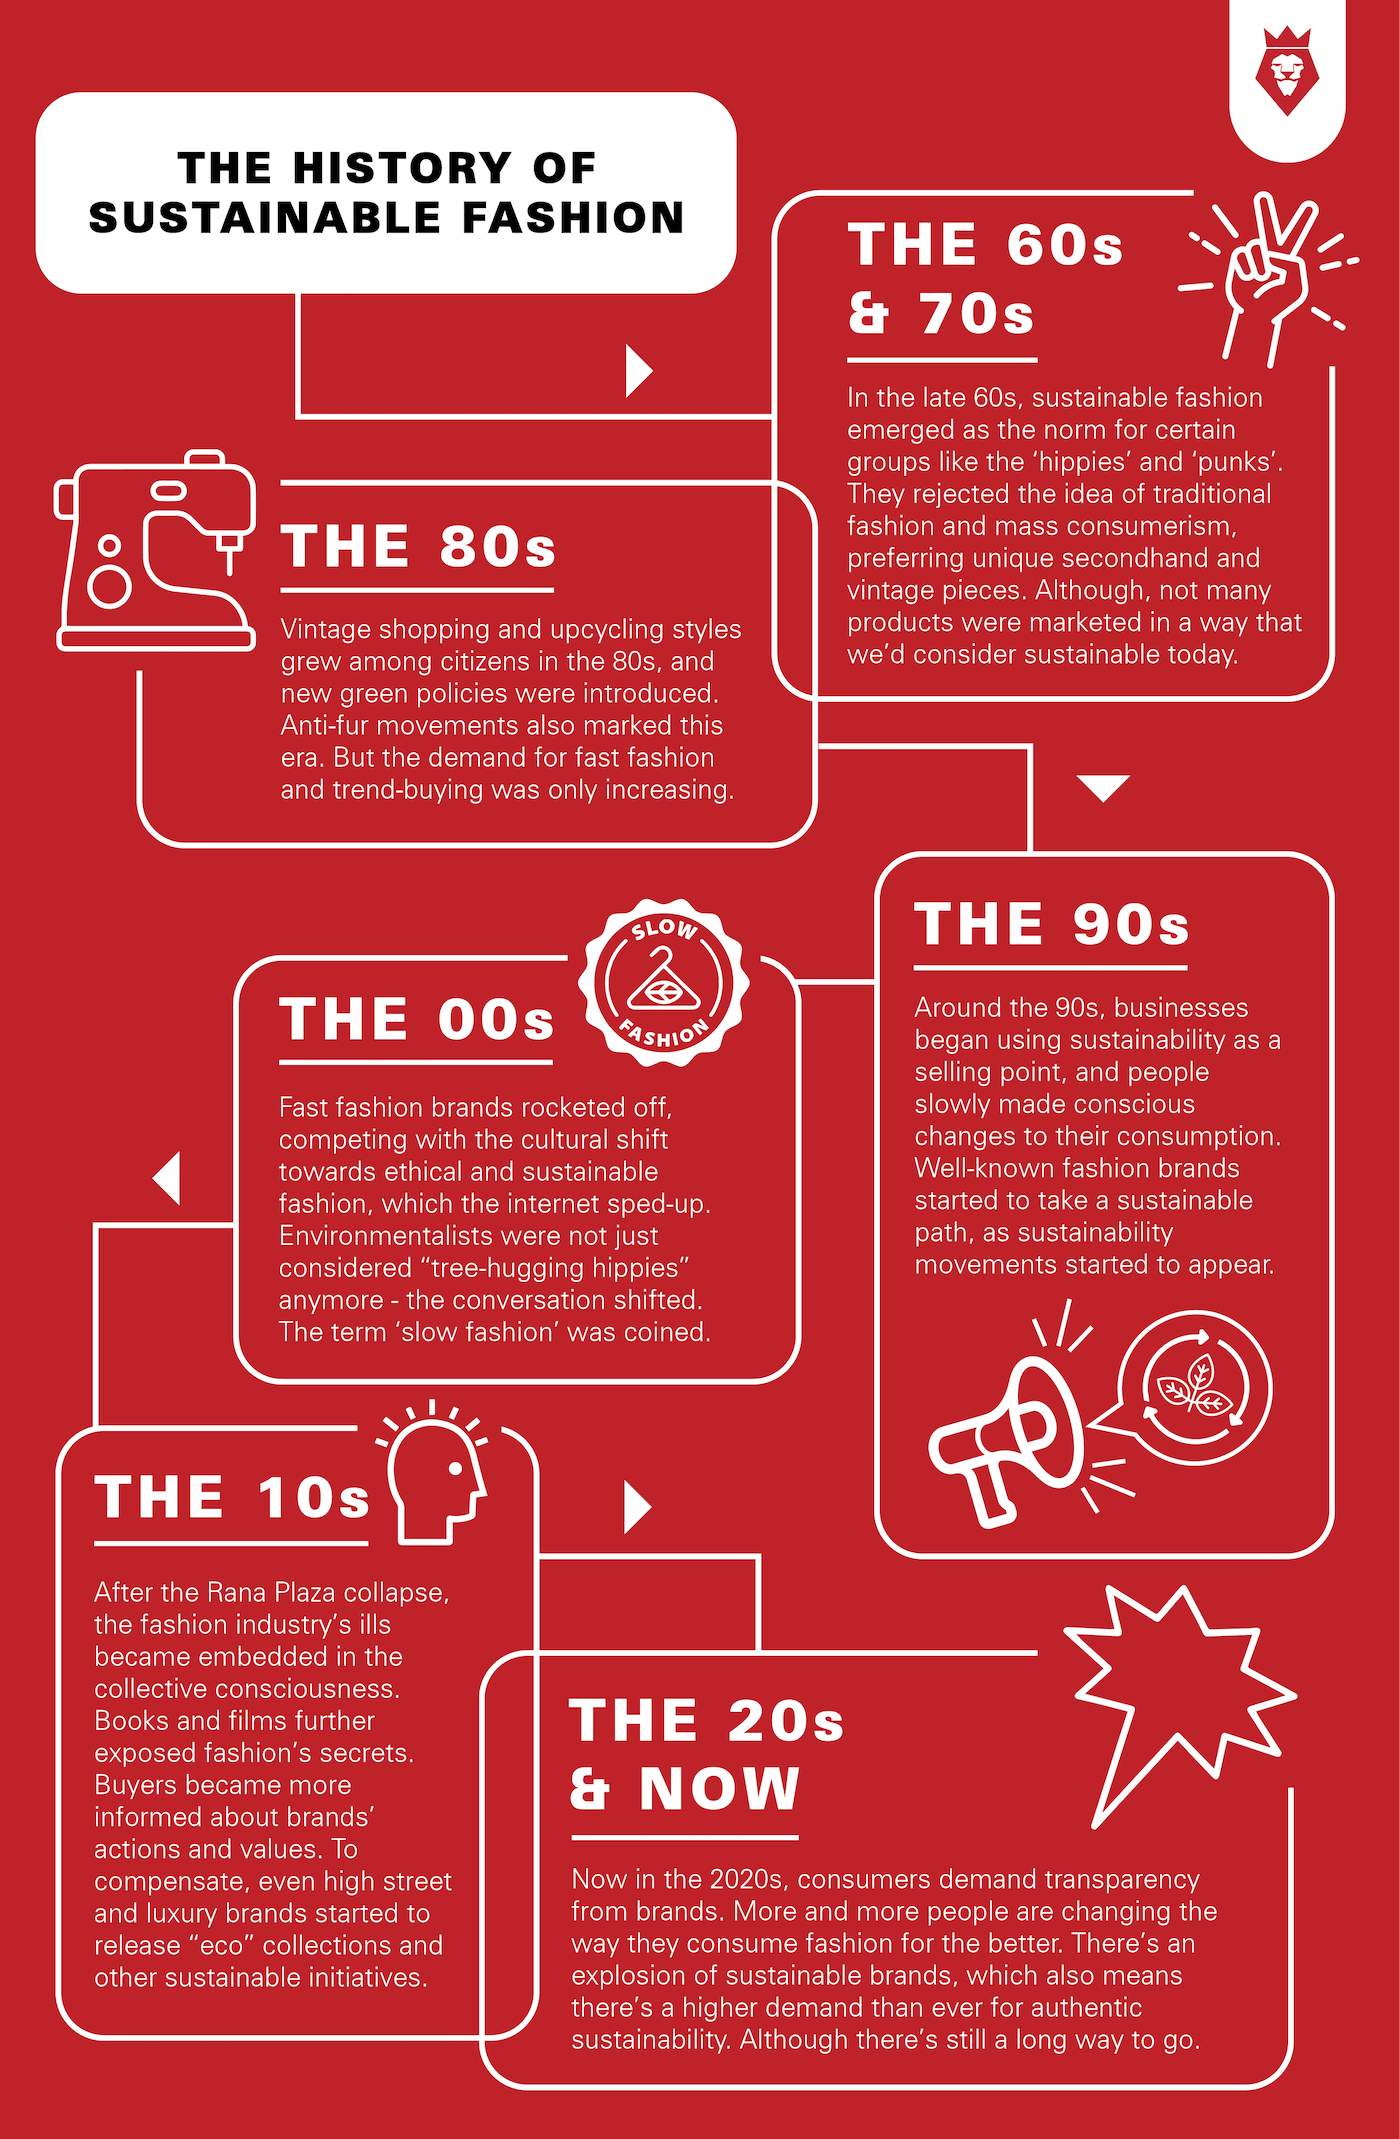 The history of sustainable fashion - infographic timeline